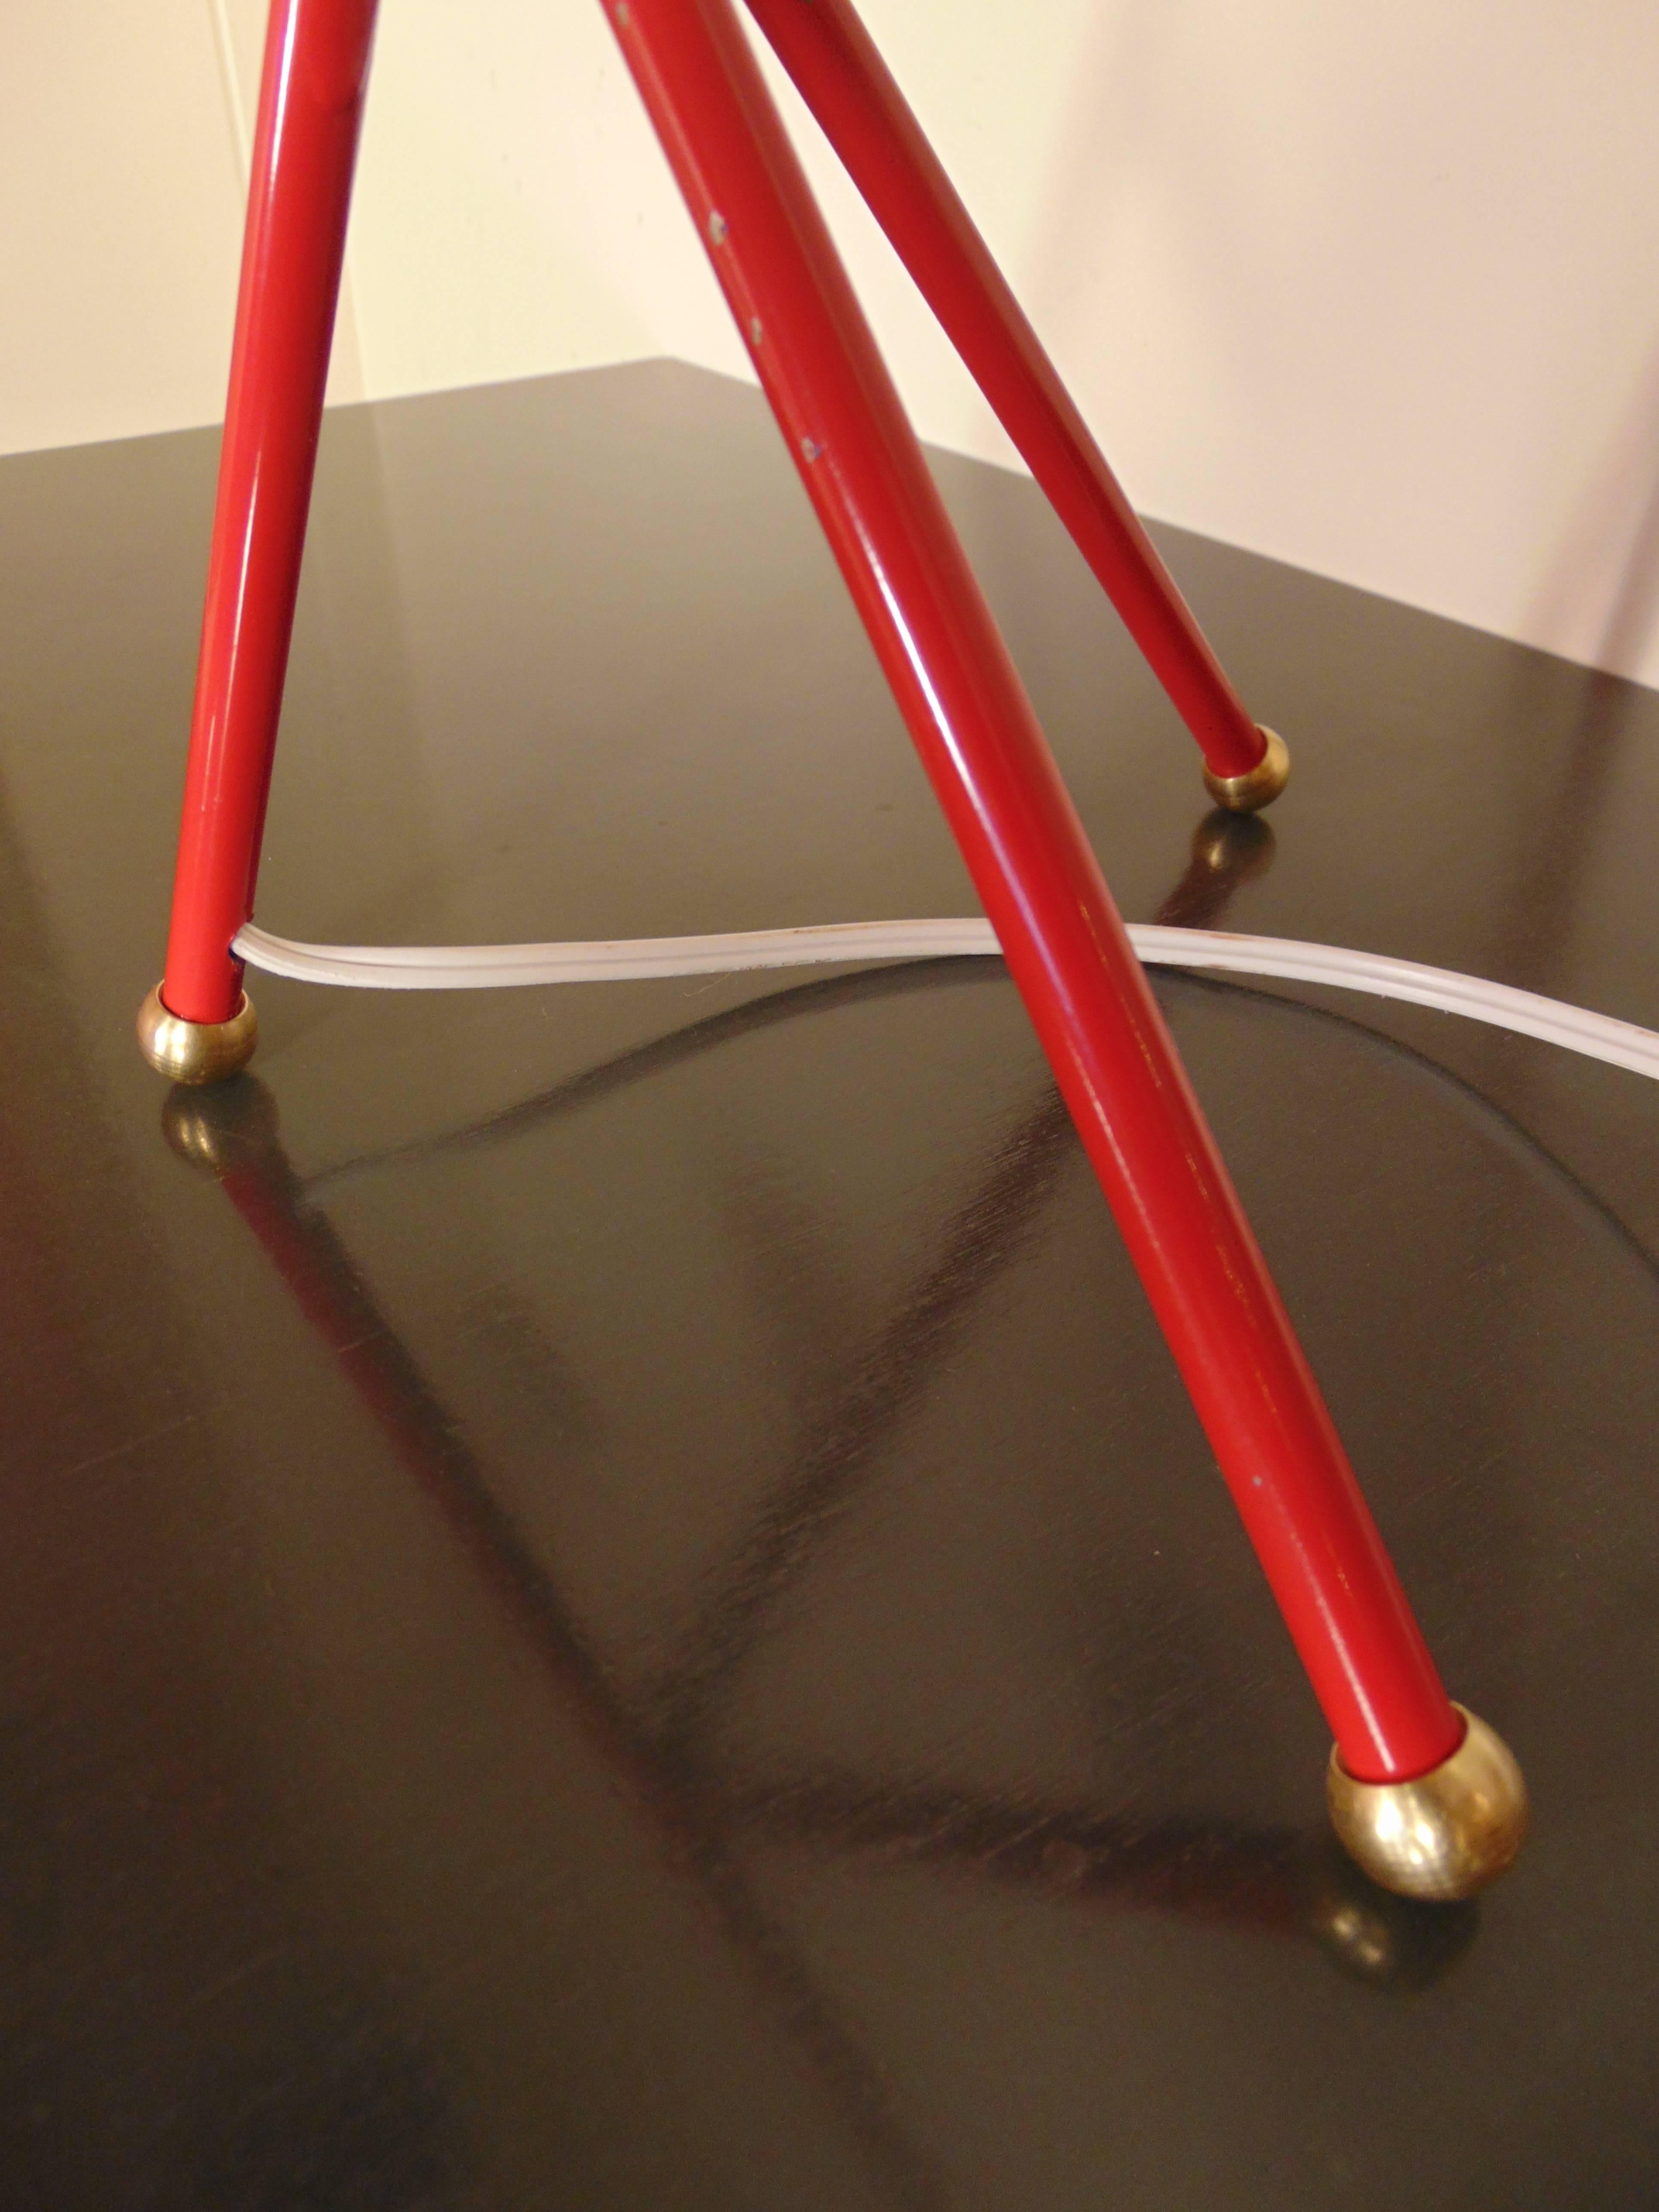 Vanguard table lamp made in the USA< in Red by Lou Blass handmade welded steel with bronze with brass accents.